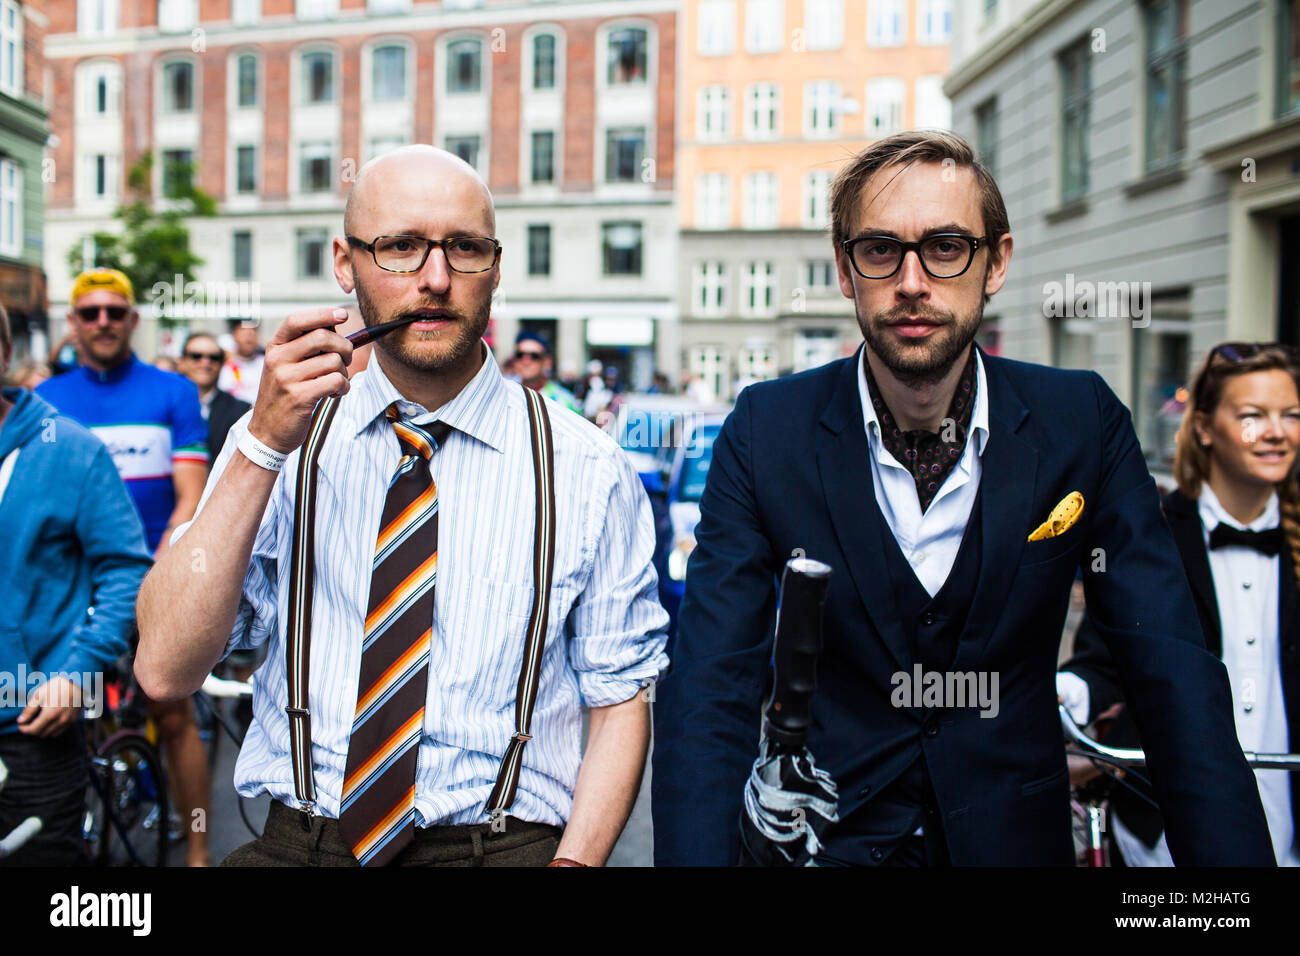 Fashionable cyclers take the Copenhagen Classico classic bike race serious and are dressed up for the occasion. Denmark, 22/06 2014. Stock Photo